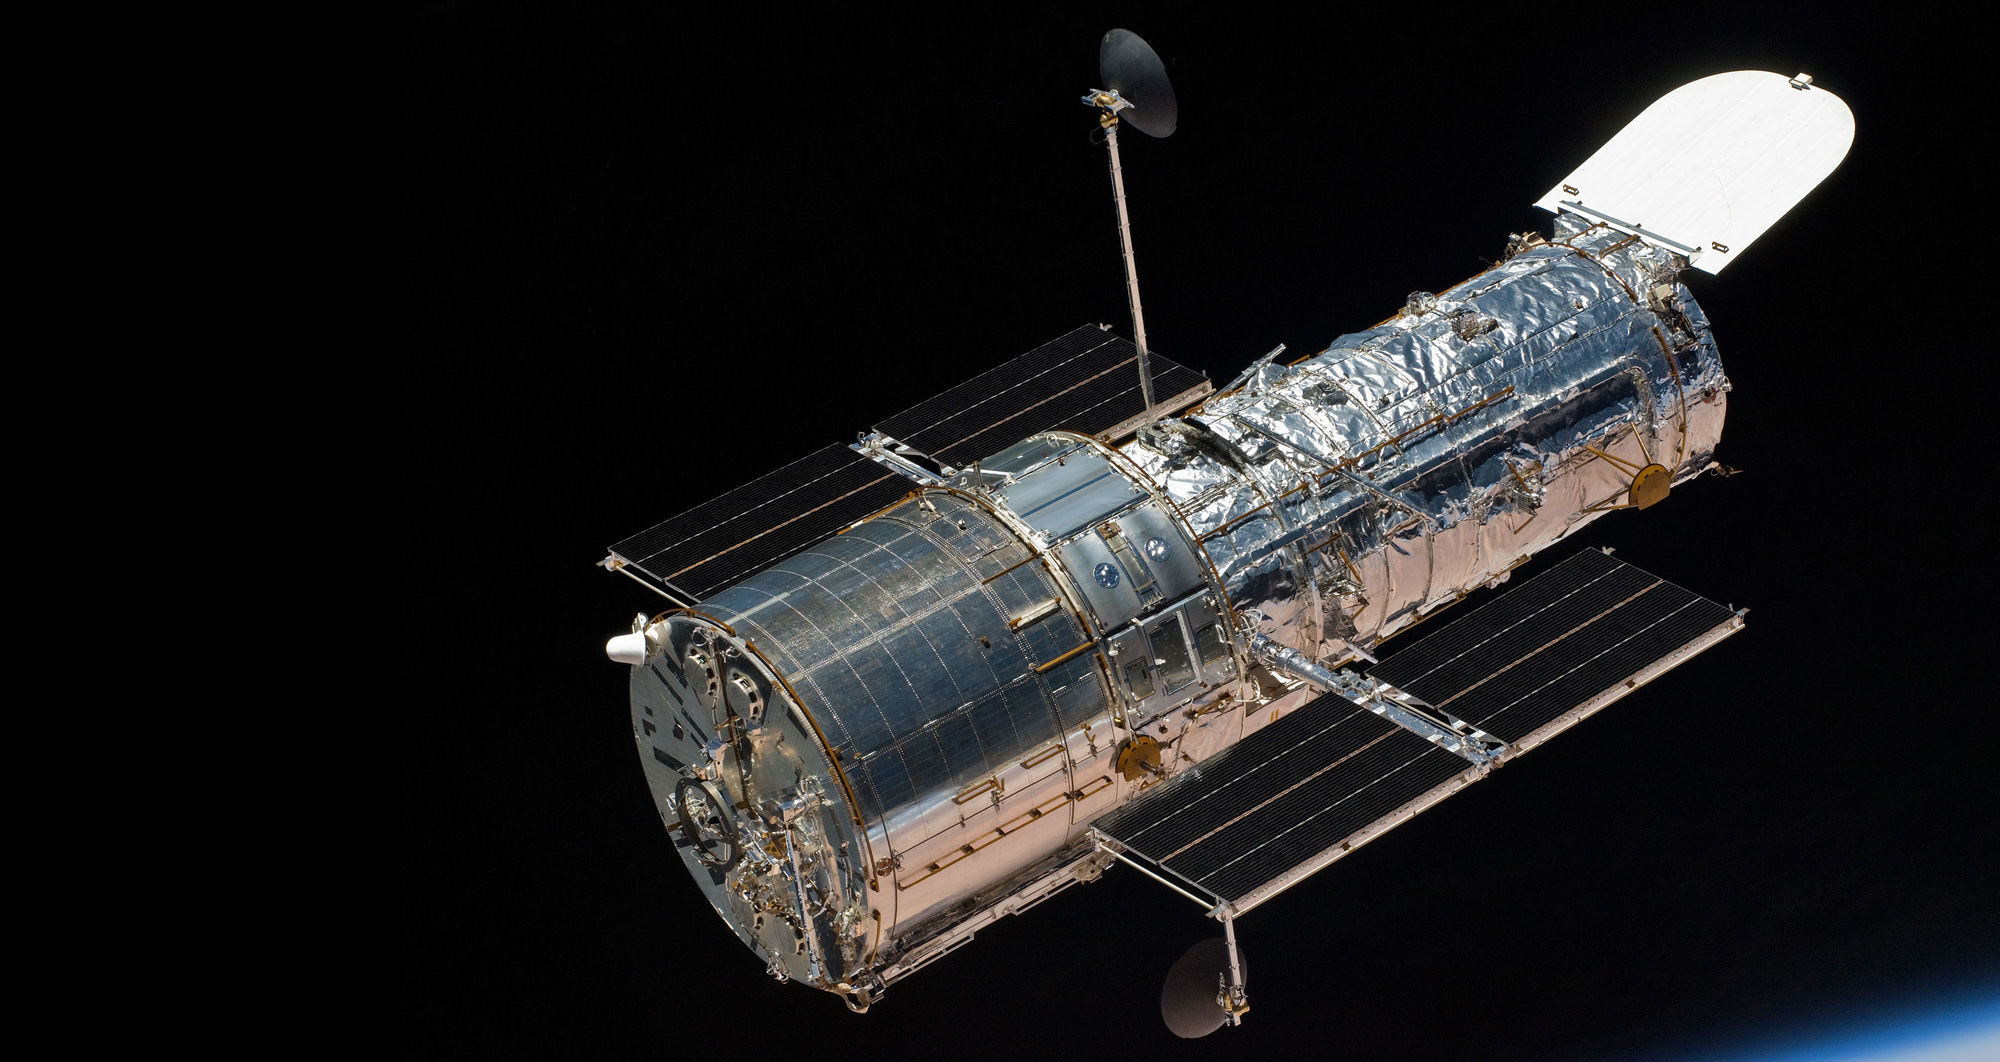 The NASA/ESA Hubble Space Telescope, seen here above the Earth during the last servicing mission in 2009. Credit: NASA